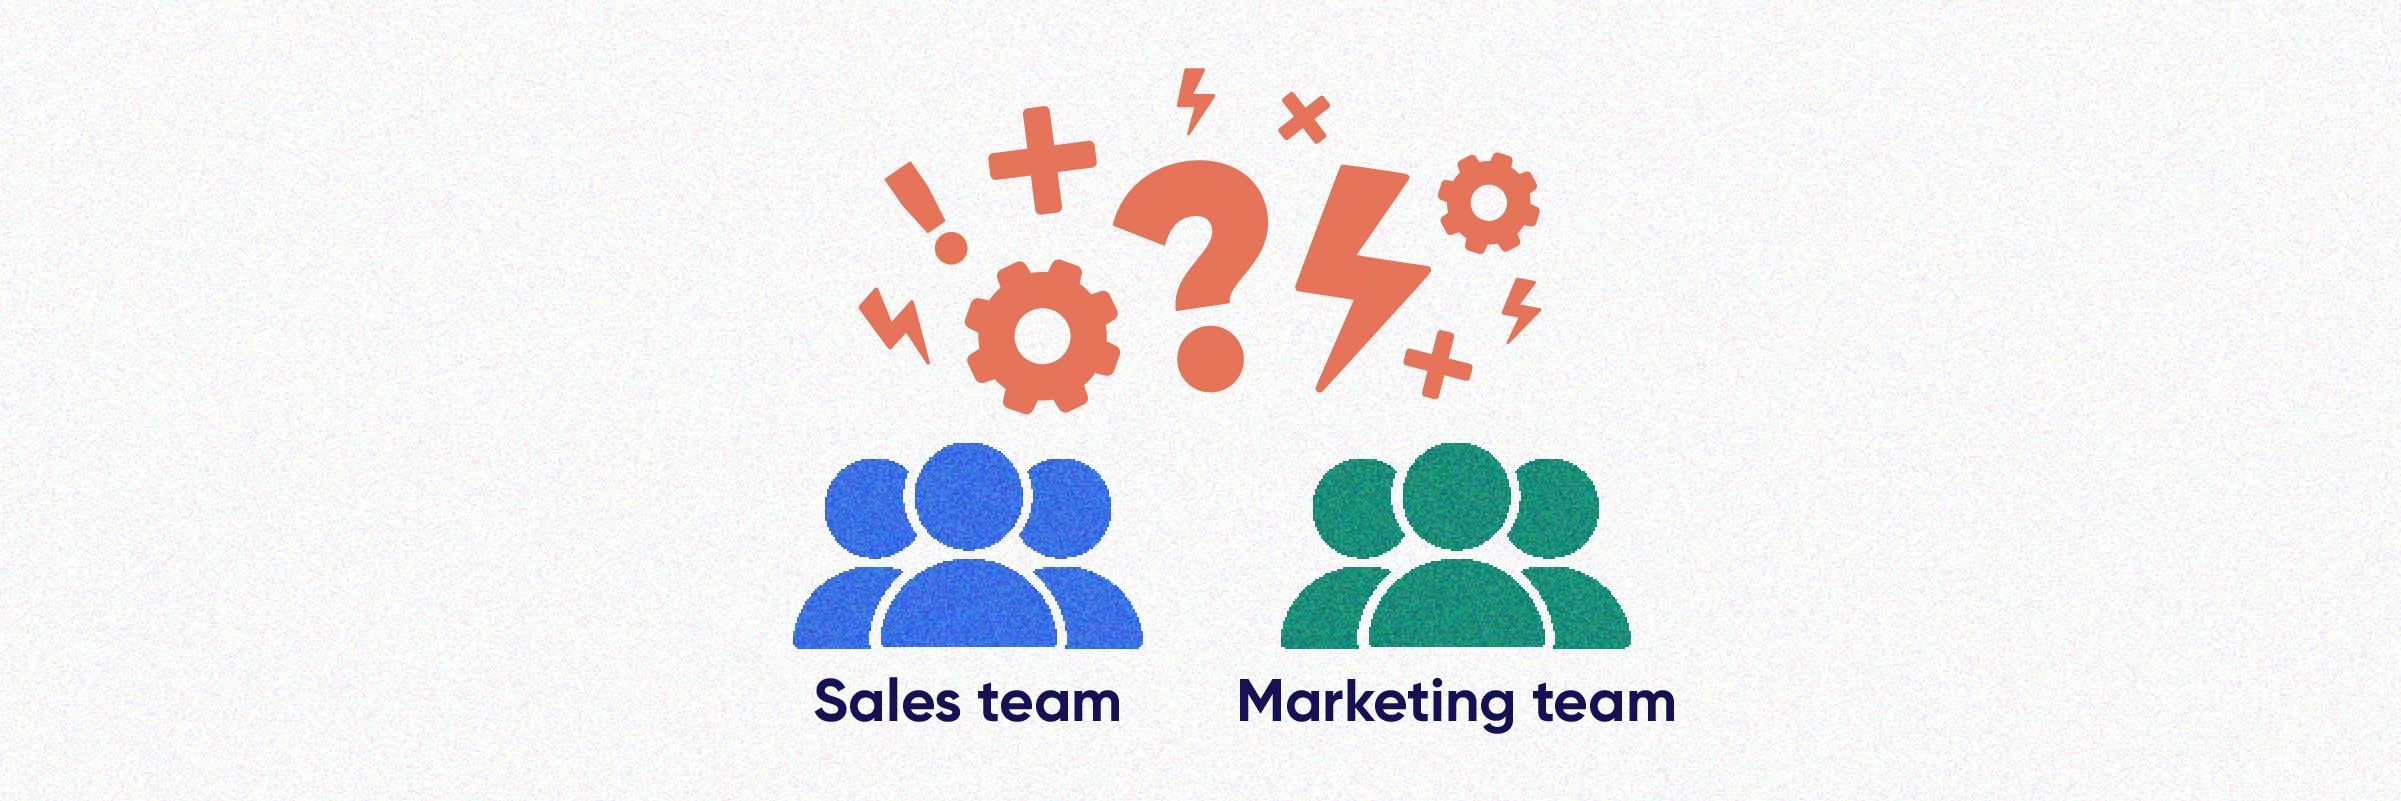 Icons representing a sales team and a marketing team with red exclamation points and question marks between them